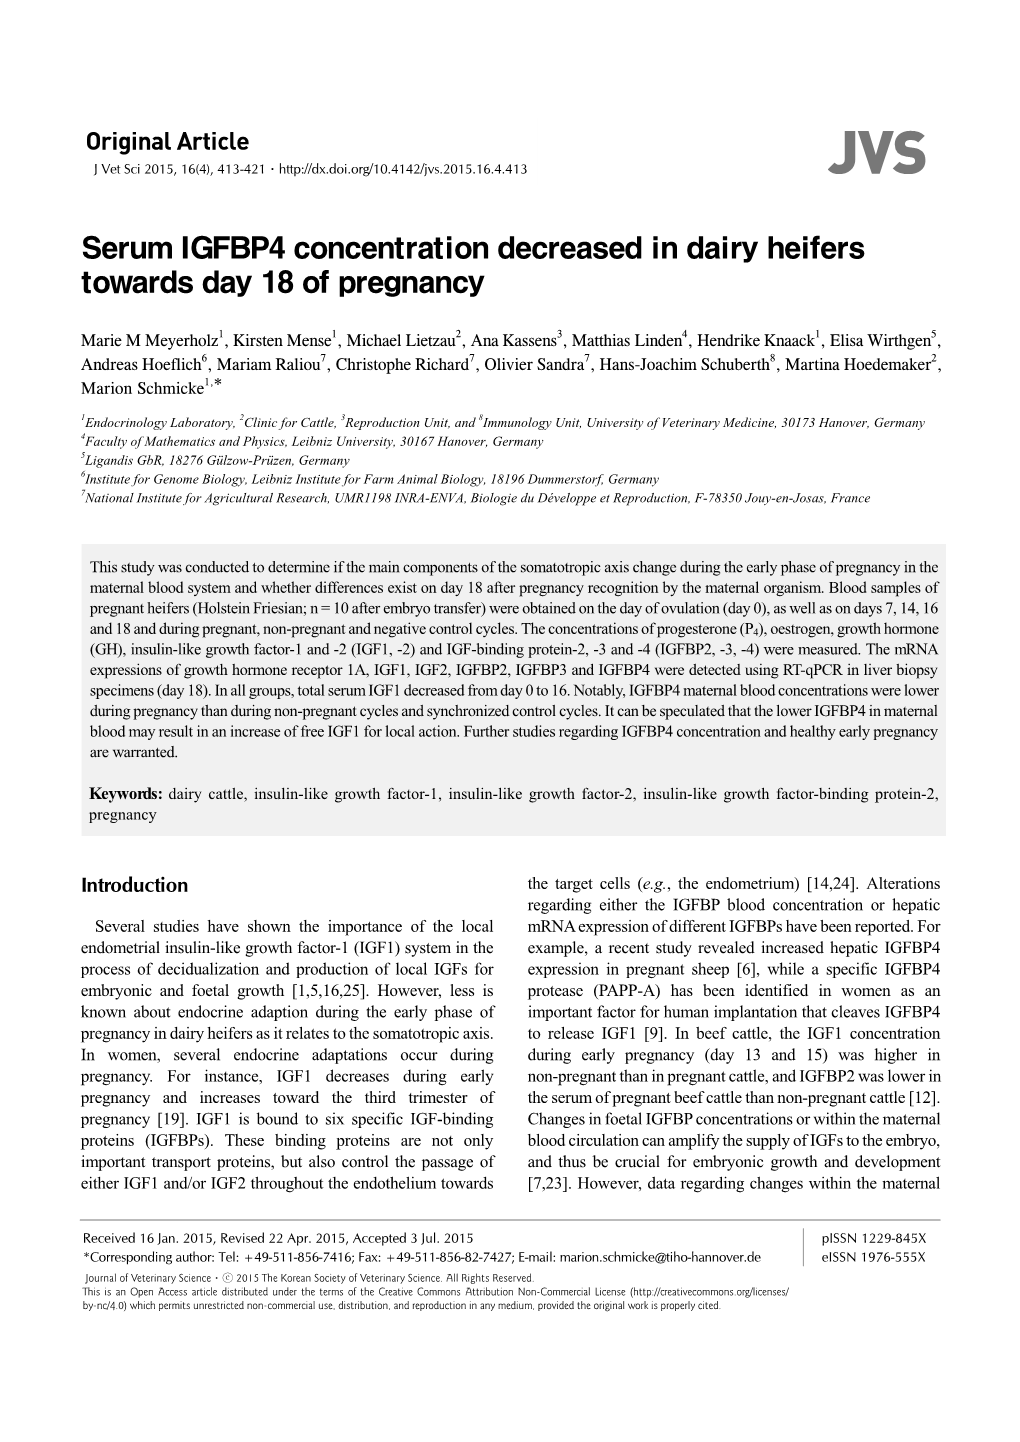 Serum IGFBP4 Concentration Decreased in Dairy Heifers Towards Day 18 of Pregnancy